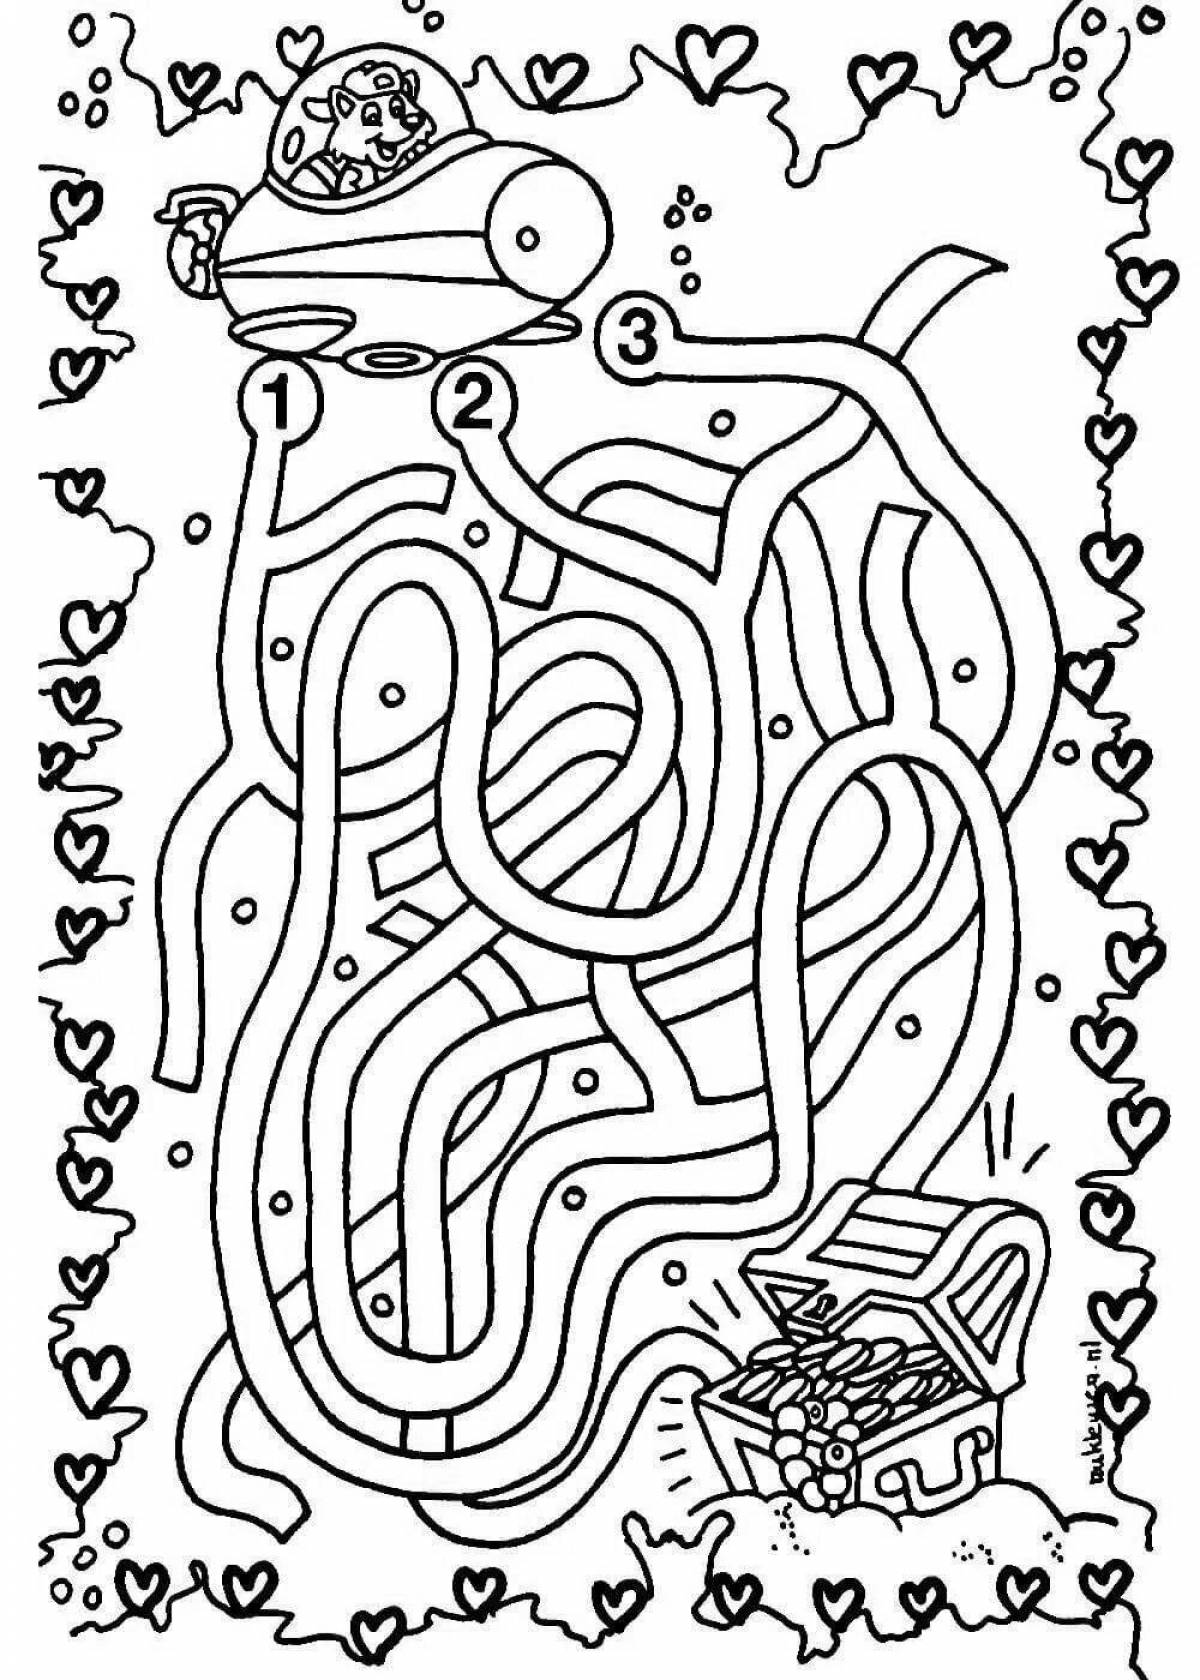 Stimulating puzzle coloring pages for 10 year olds